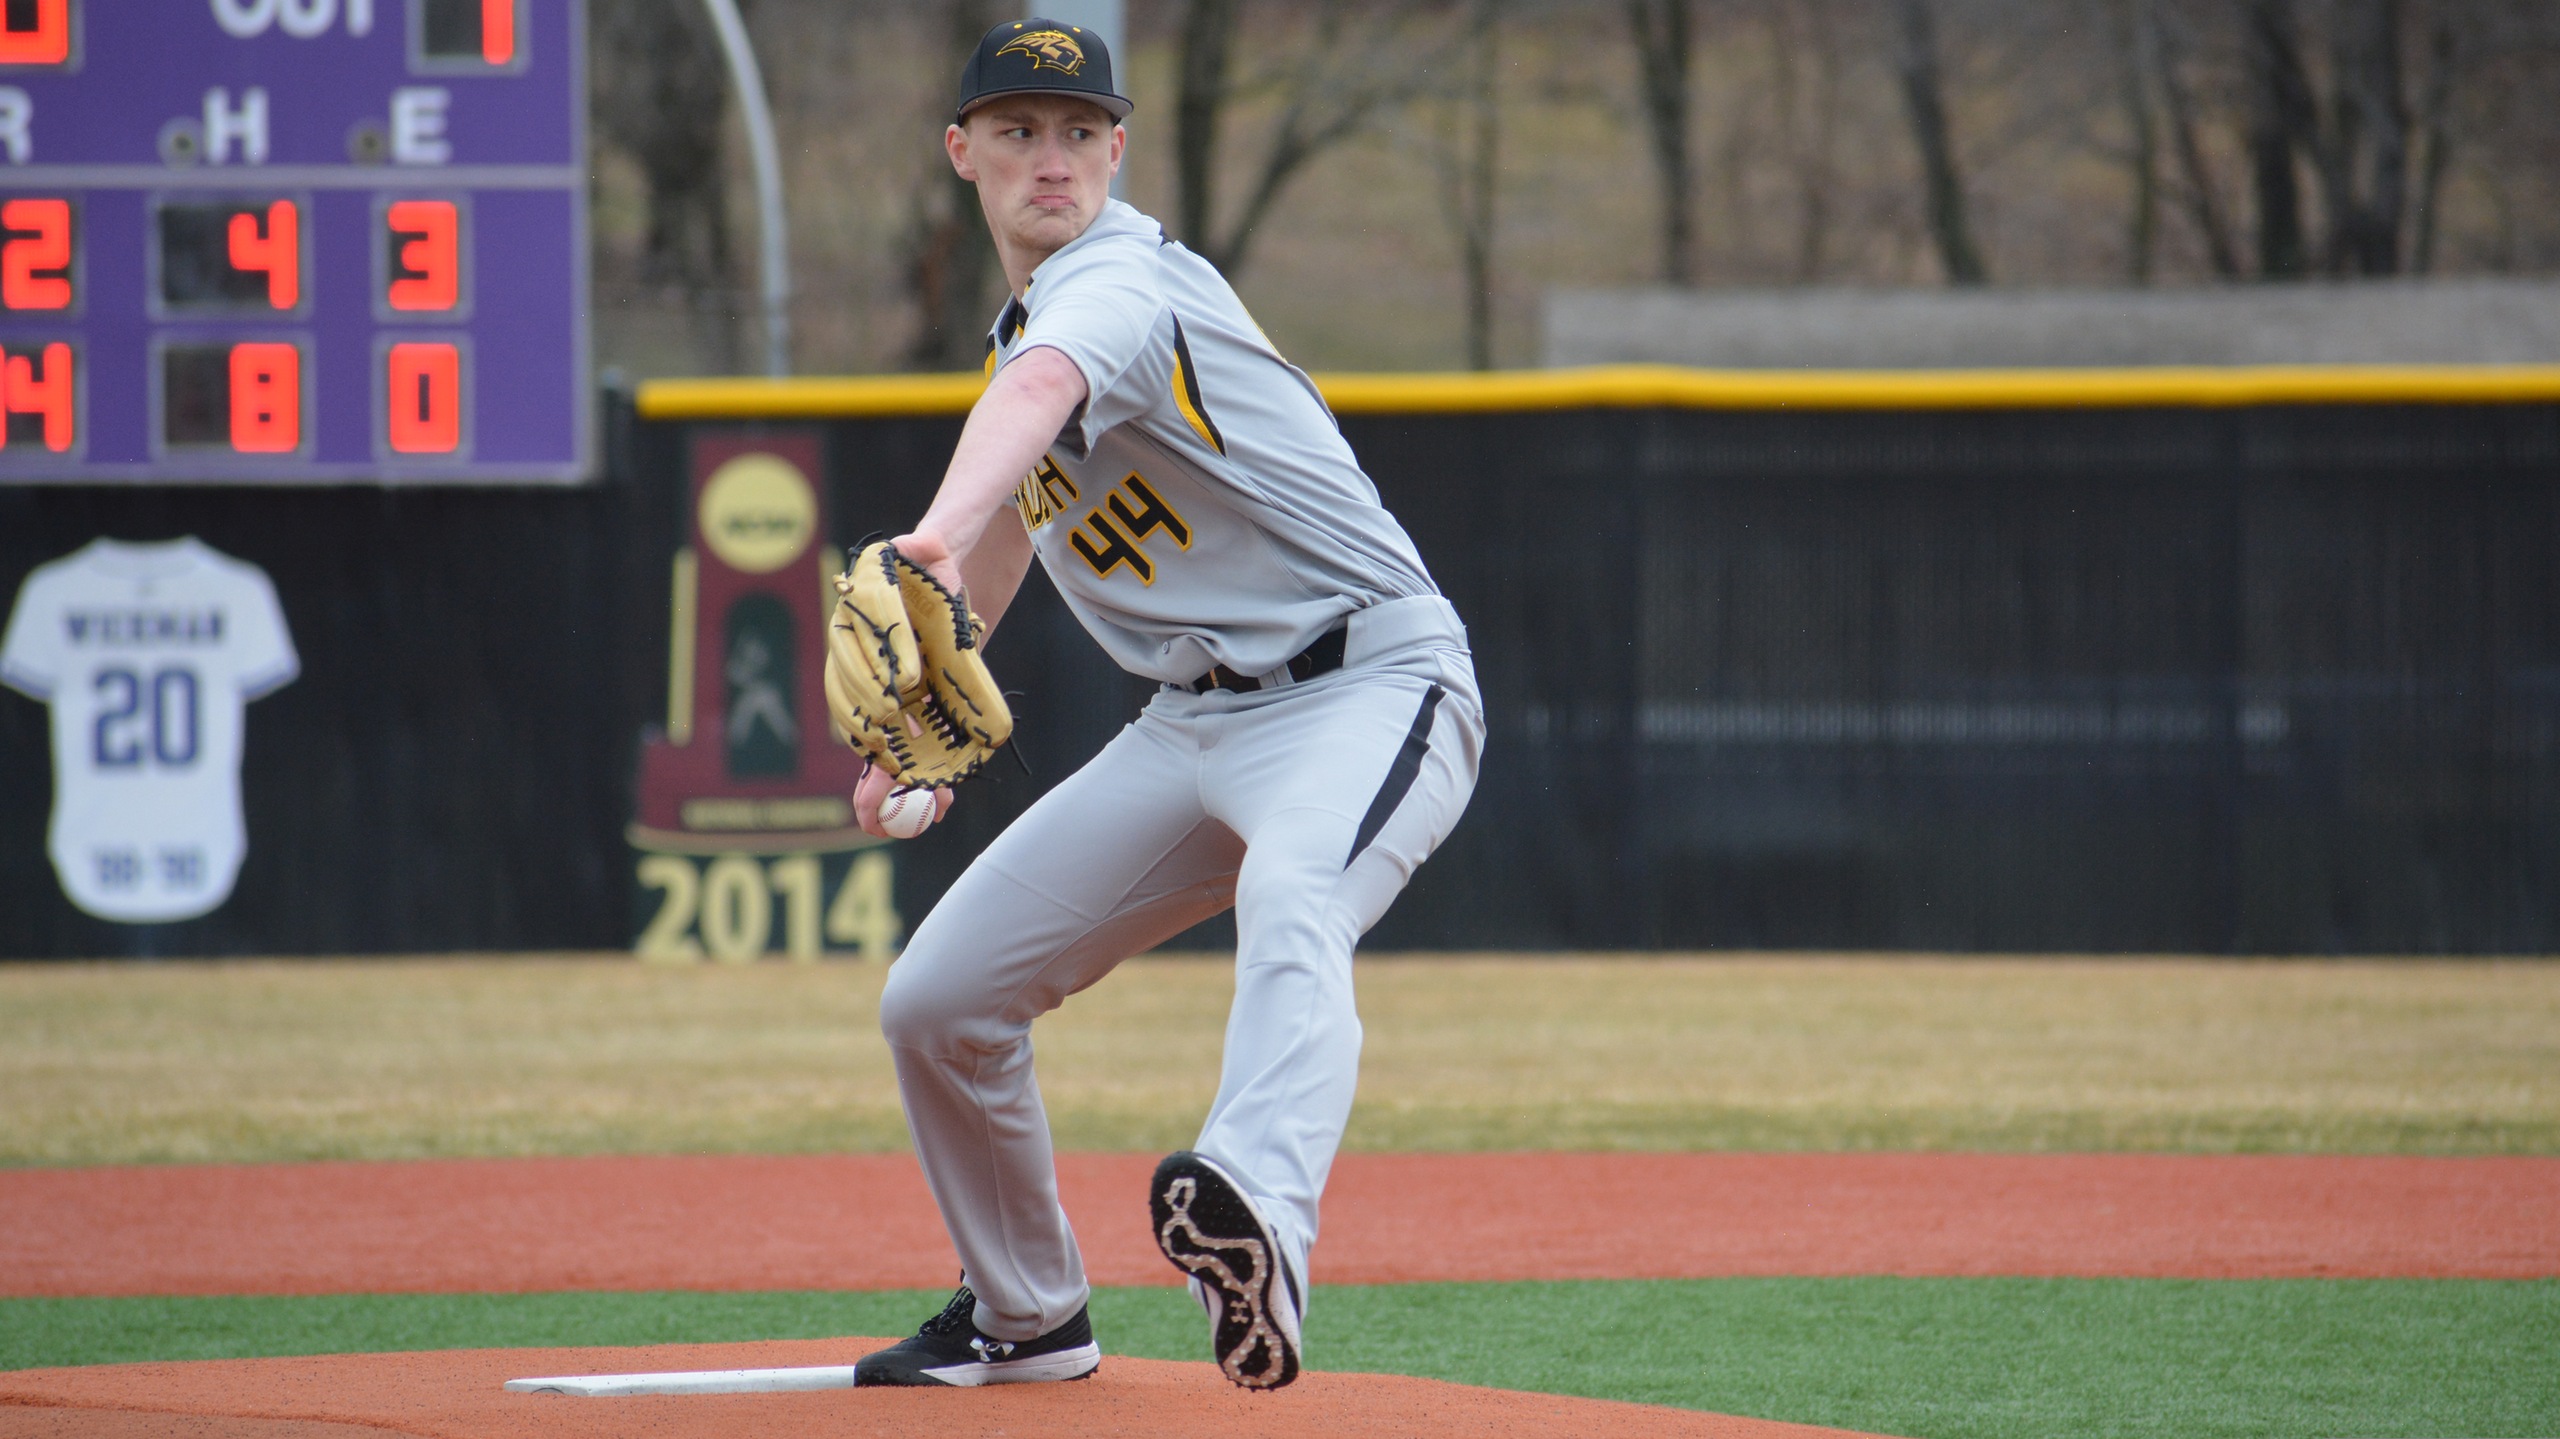 Nick Loizzi pitched a perfect sixth inning in his first appearance as a Titan during the opener.